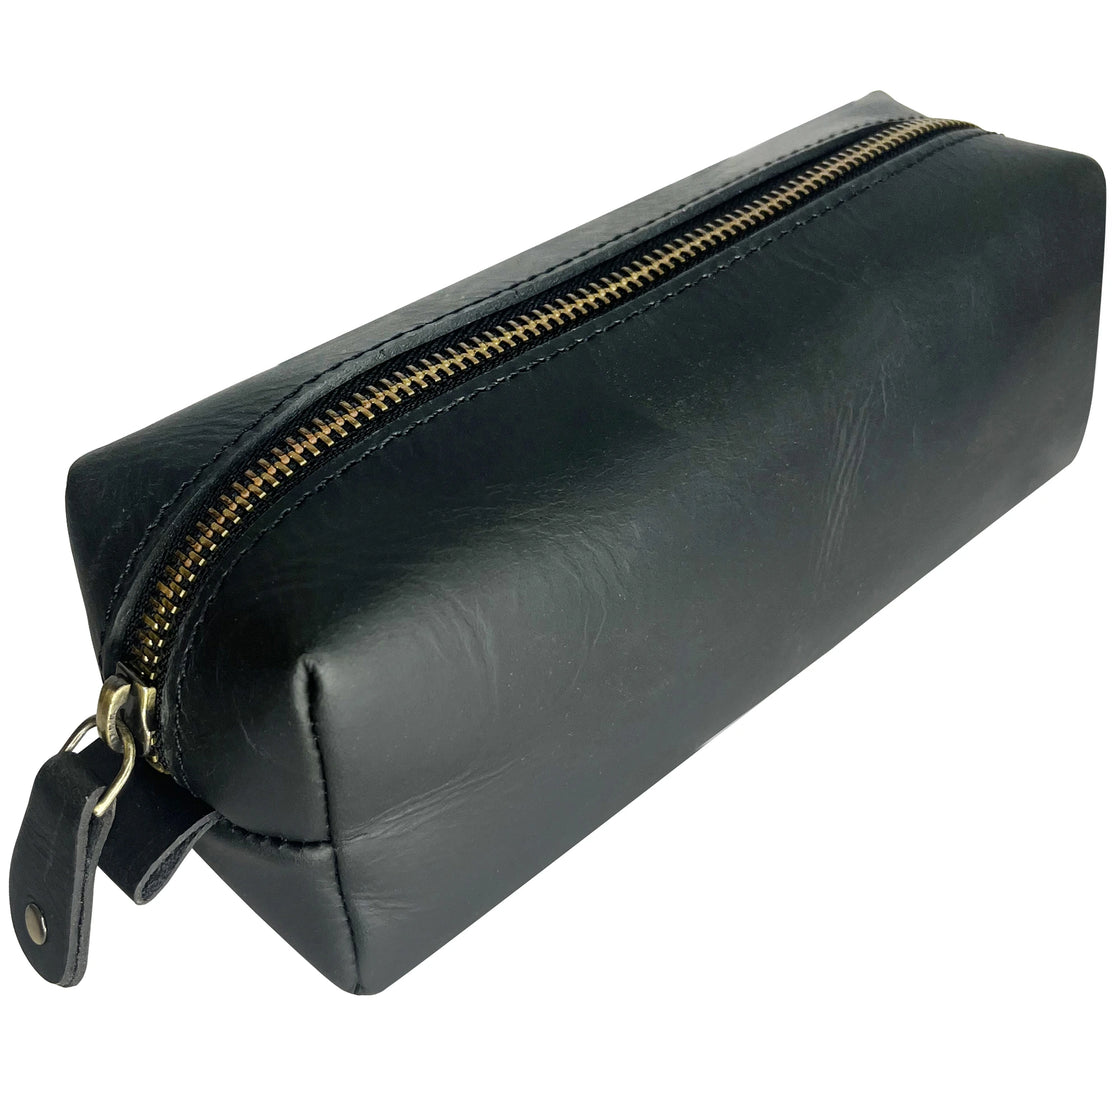 Leather Pencil Case - Handcrafted Premium Zippered Pen Pouch (Black)